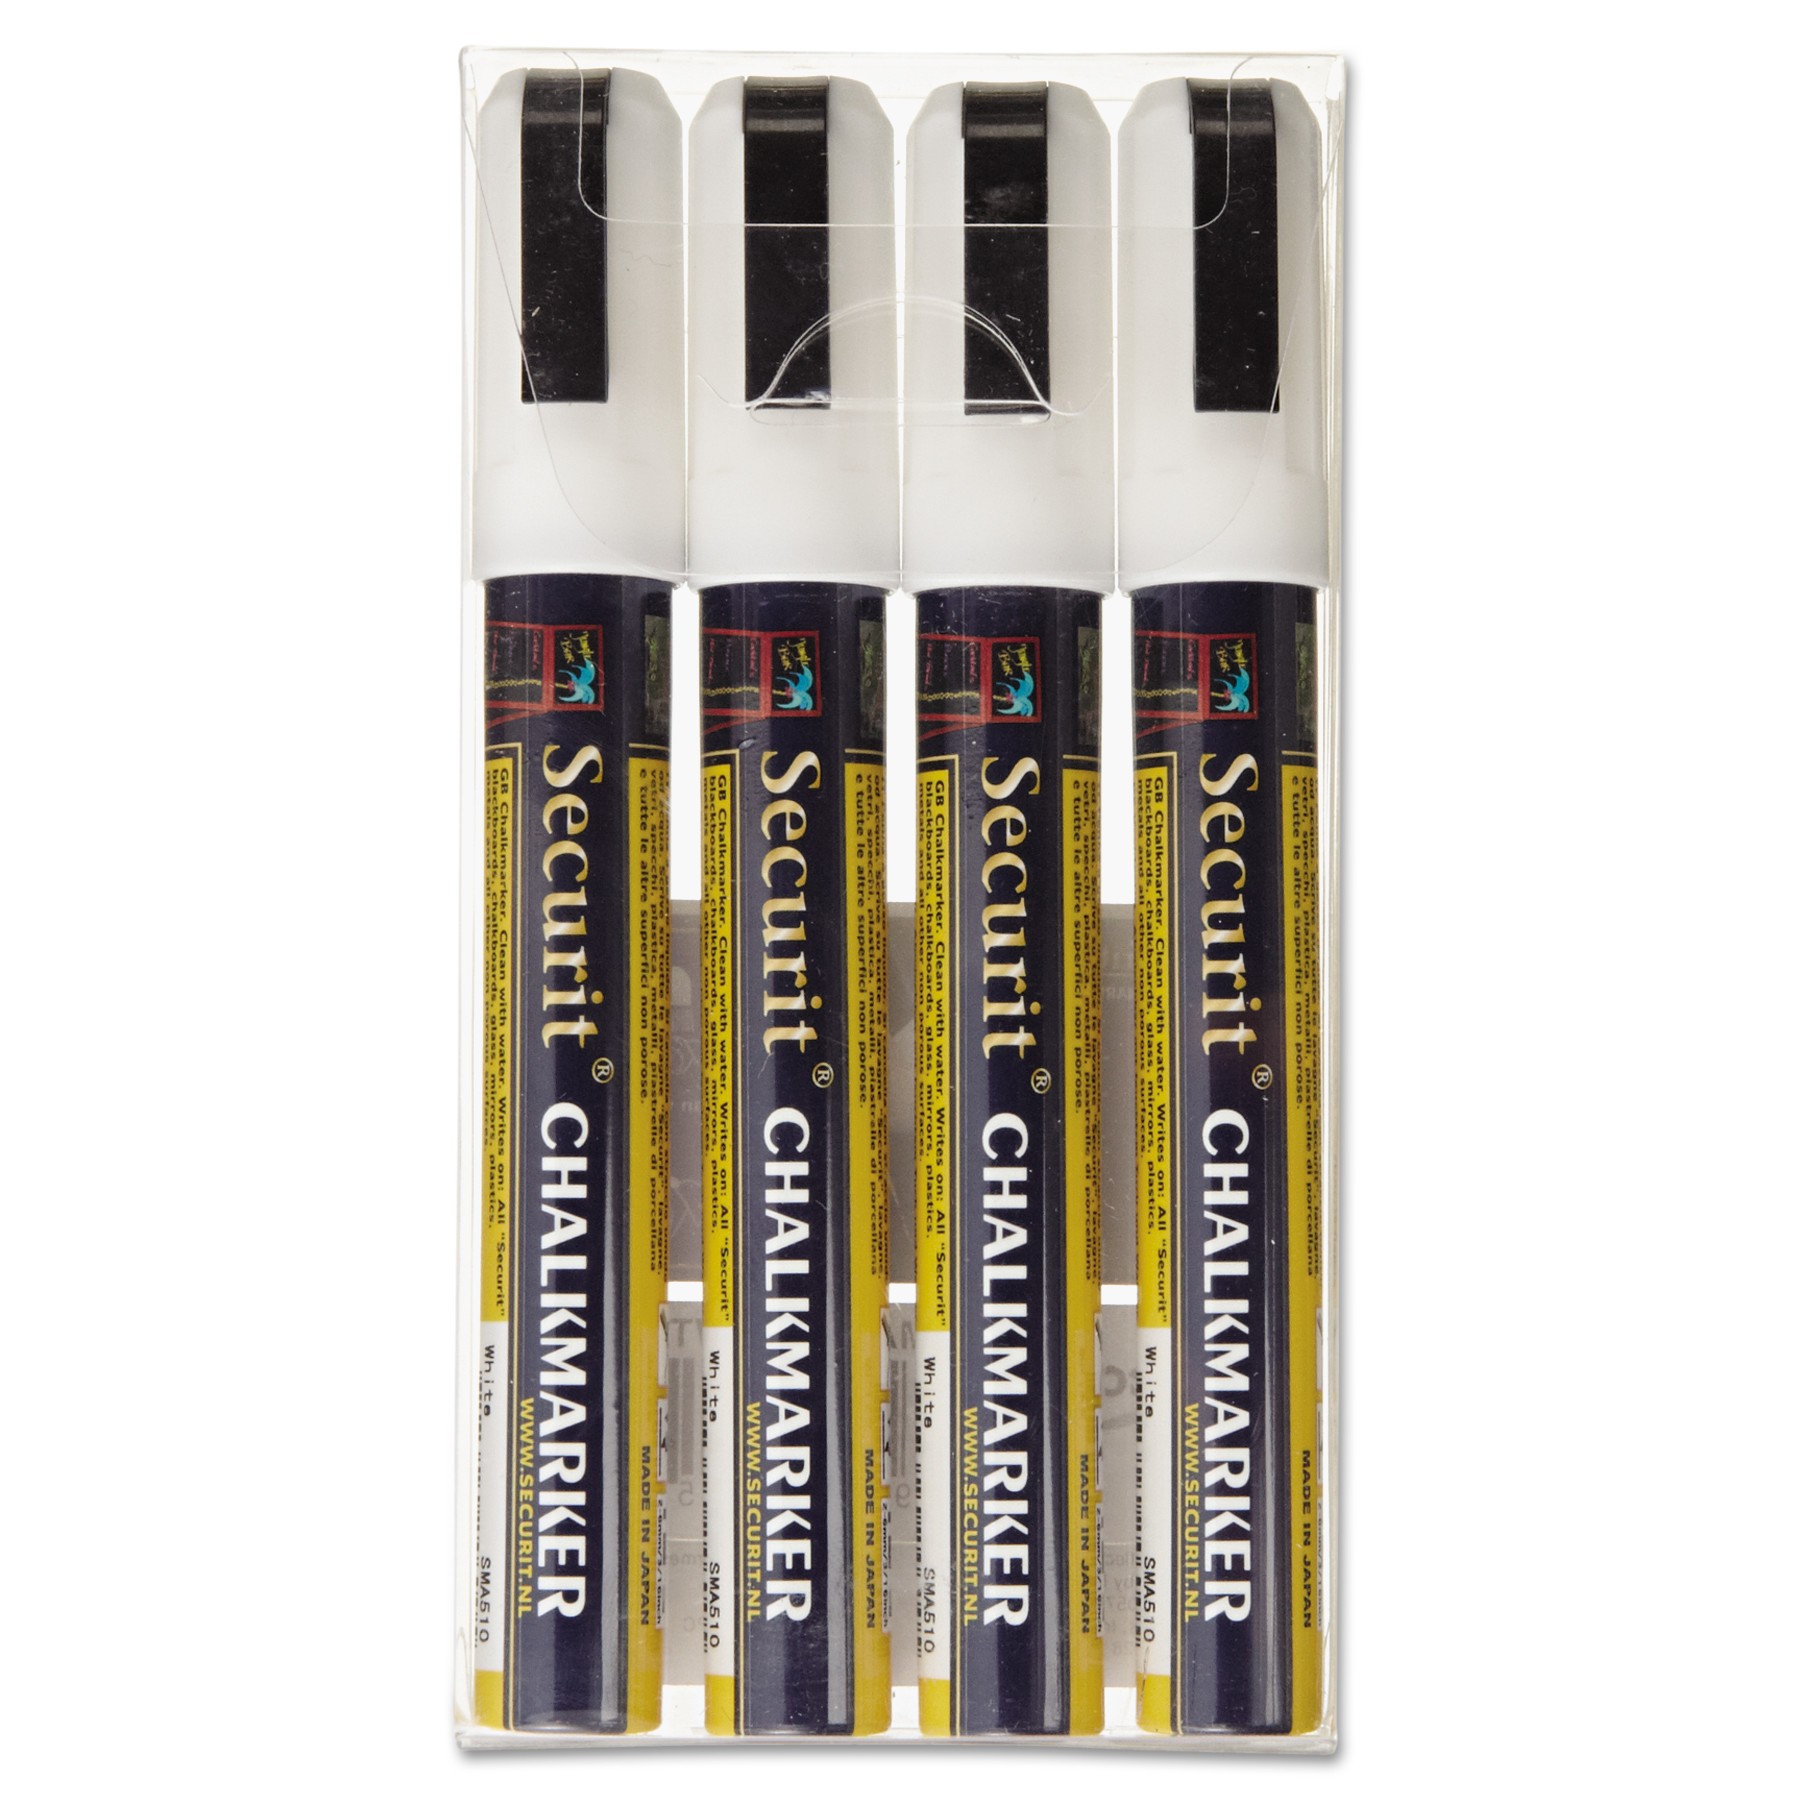 Deflecto Wet Erase Markers - Fine, Bold Marker Point - Chisel Marker Point Style - White - 4 / Pack